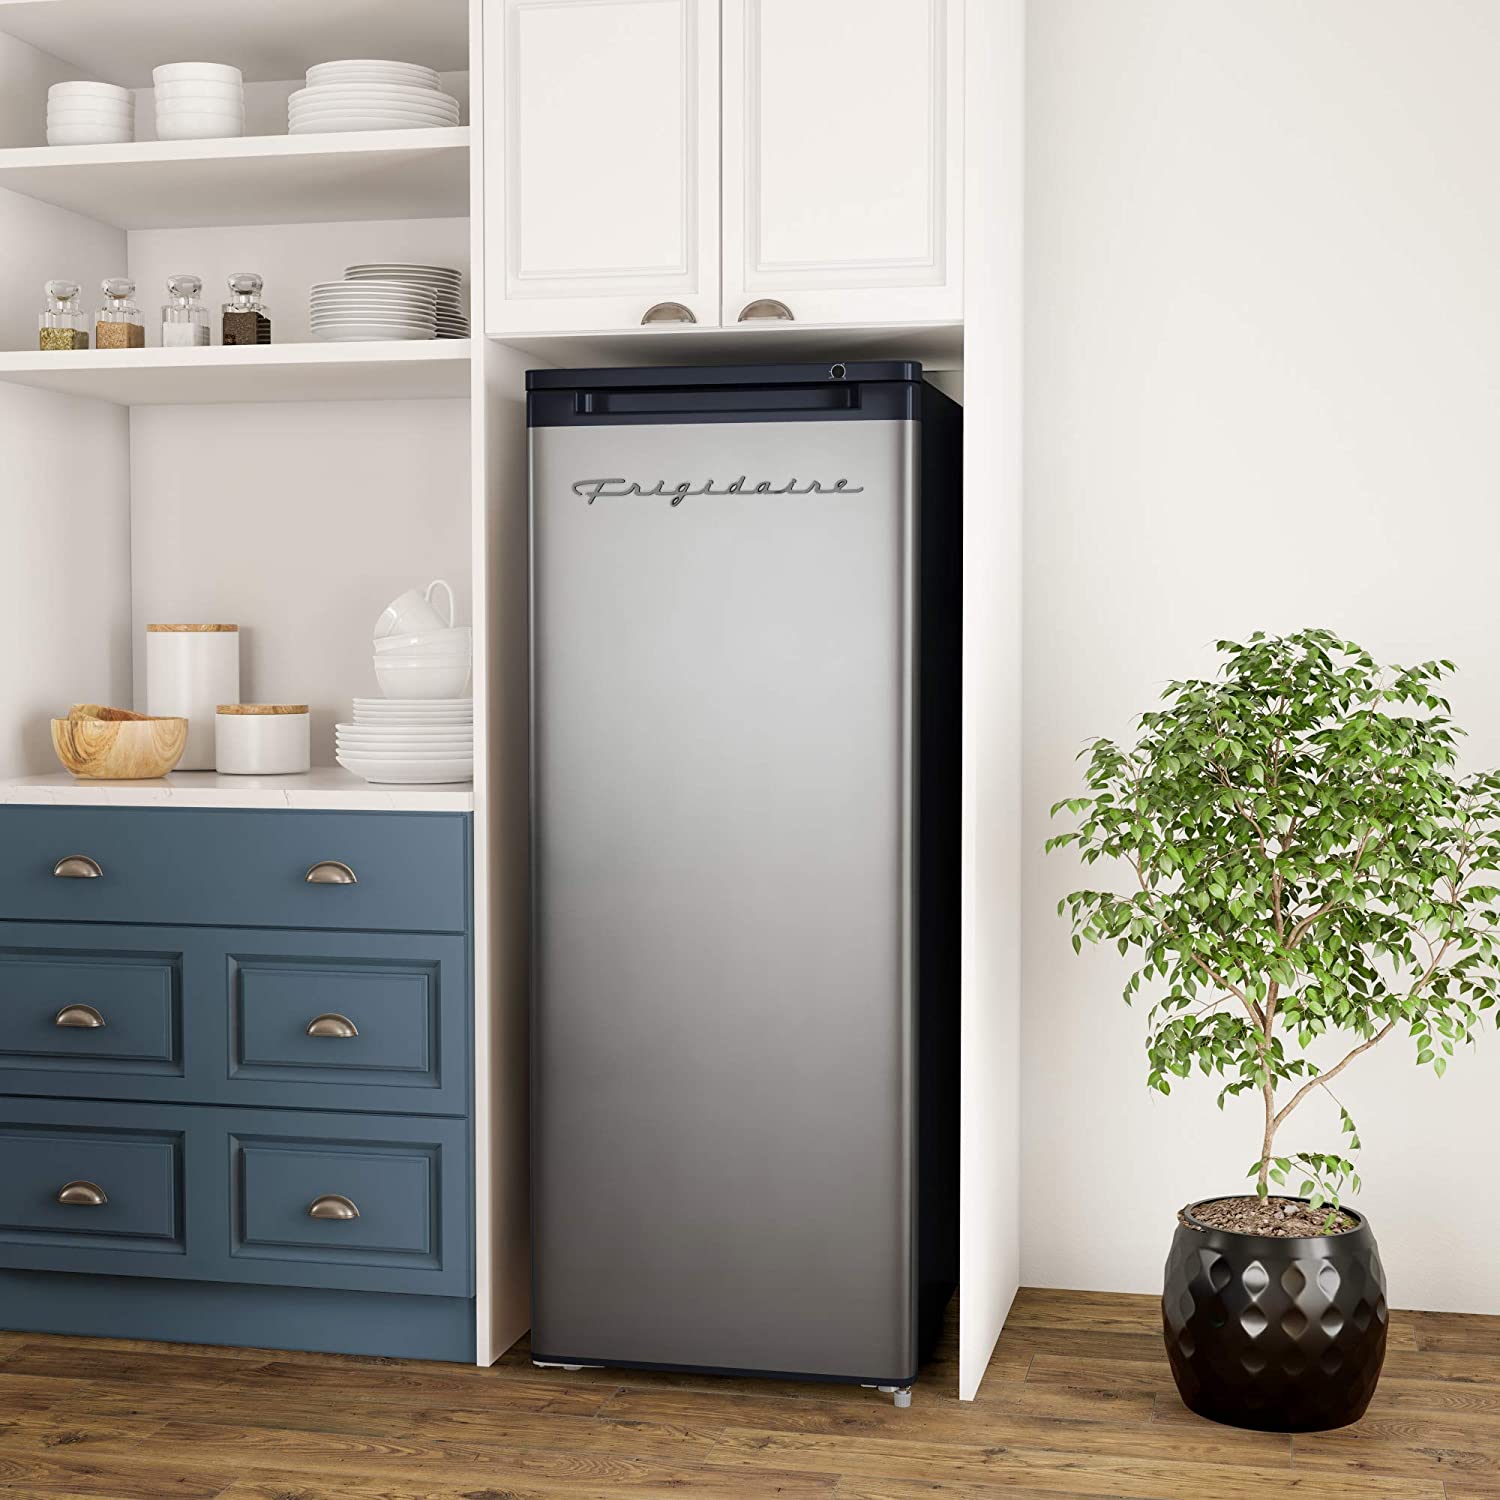 10 Best GARAGE FREEZER 2022 Review: Garage Ready Upright - Chest Freezers For Hot Garage All In One Cooling Gear Lab: Any Refrigerators Air Conditioners Freezers Ice Makers Coolers Fans Reviewed And Compared.